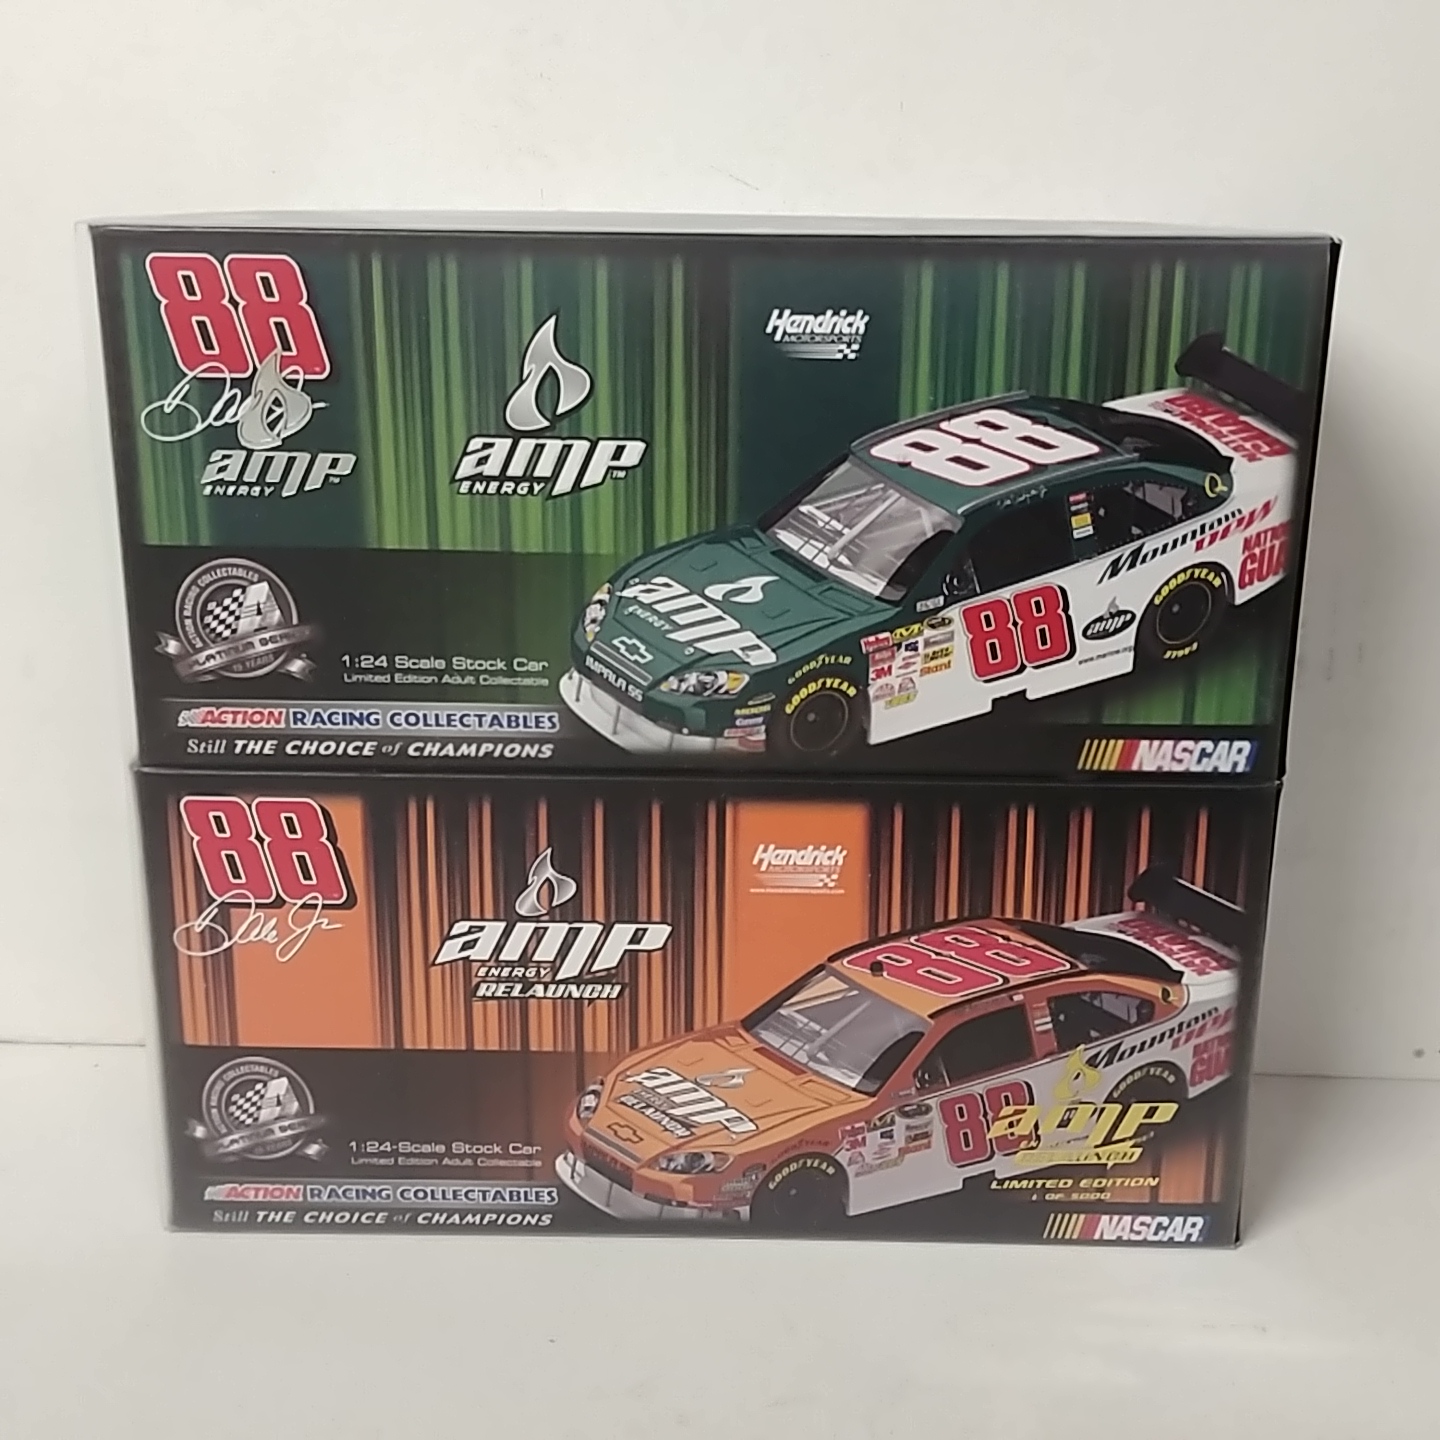 2008 Dale Earnhardt Jr 1/24th Relaunch and Amp Energy Green 2 pack cars